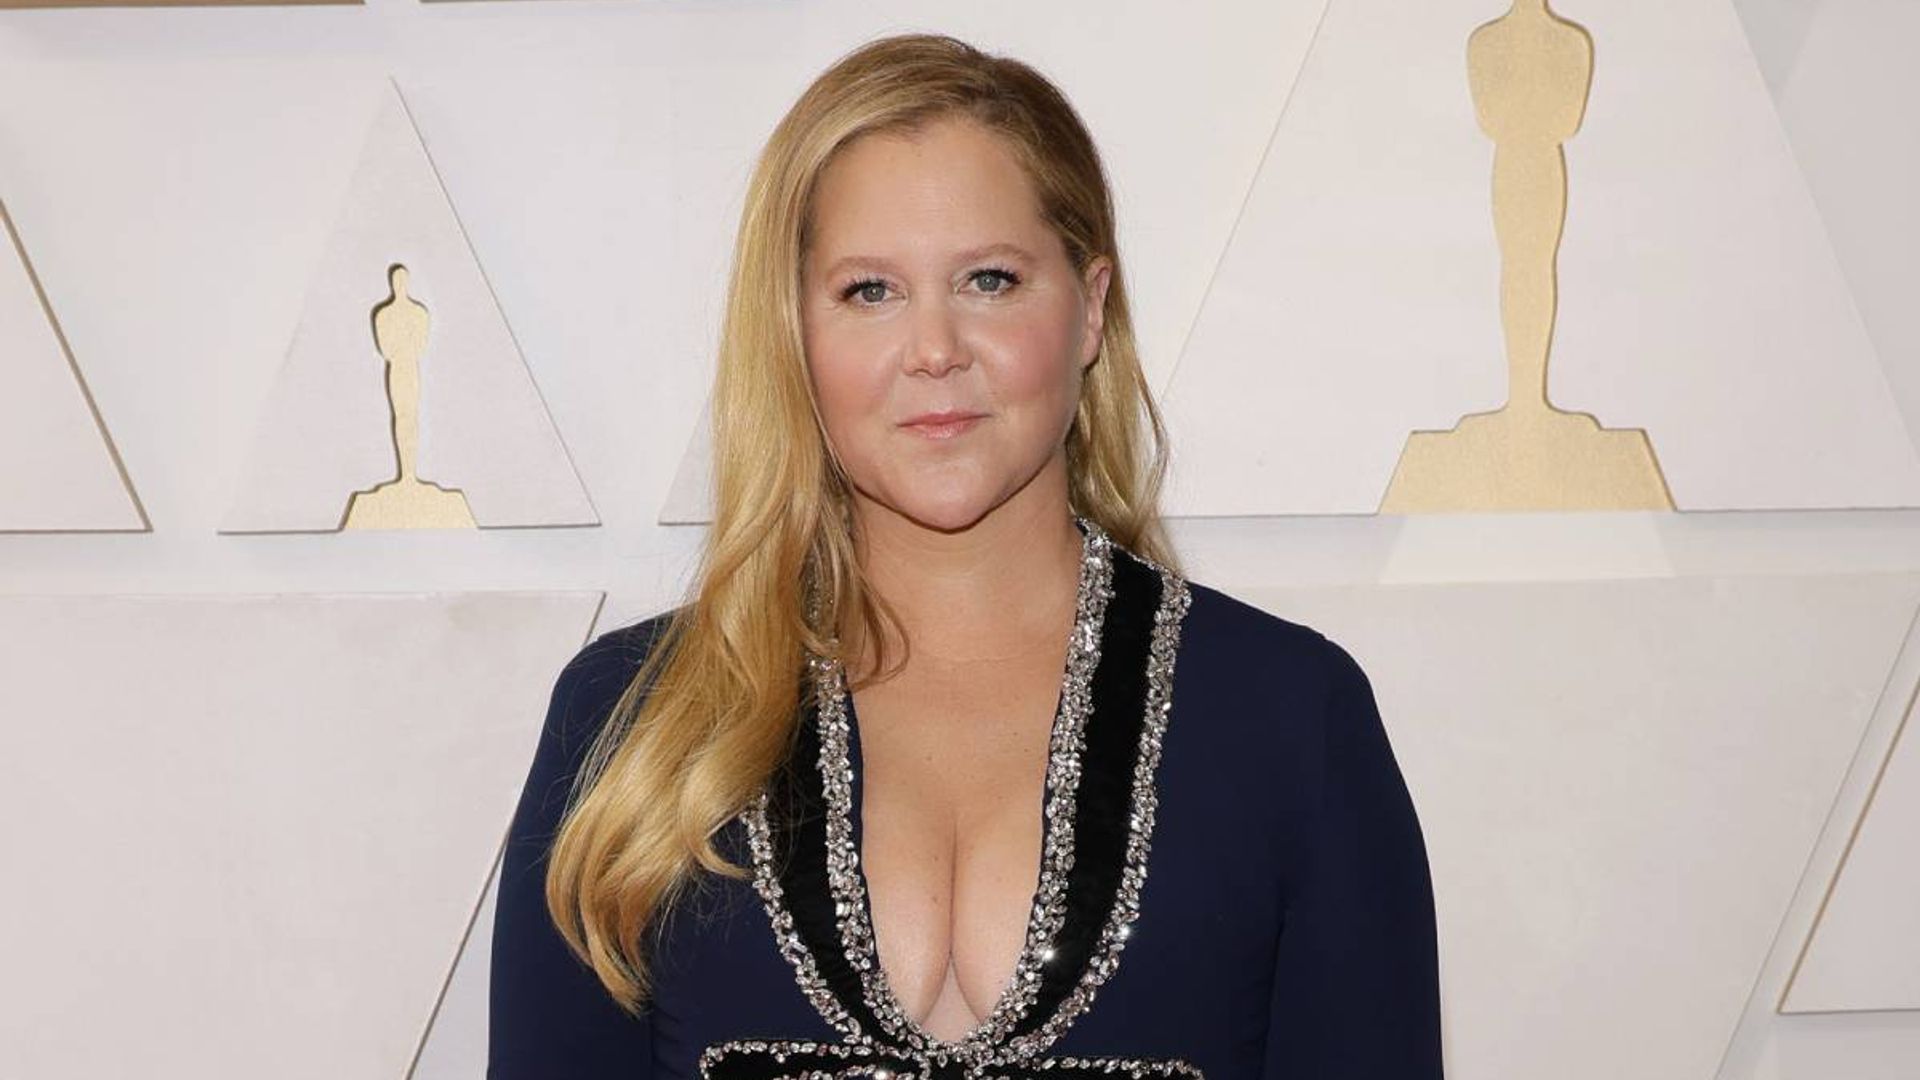 Amy Schumer releases statement about Will Smith and Chris Rock: 'So disturbing'